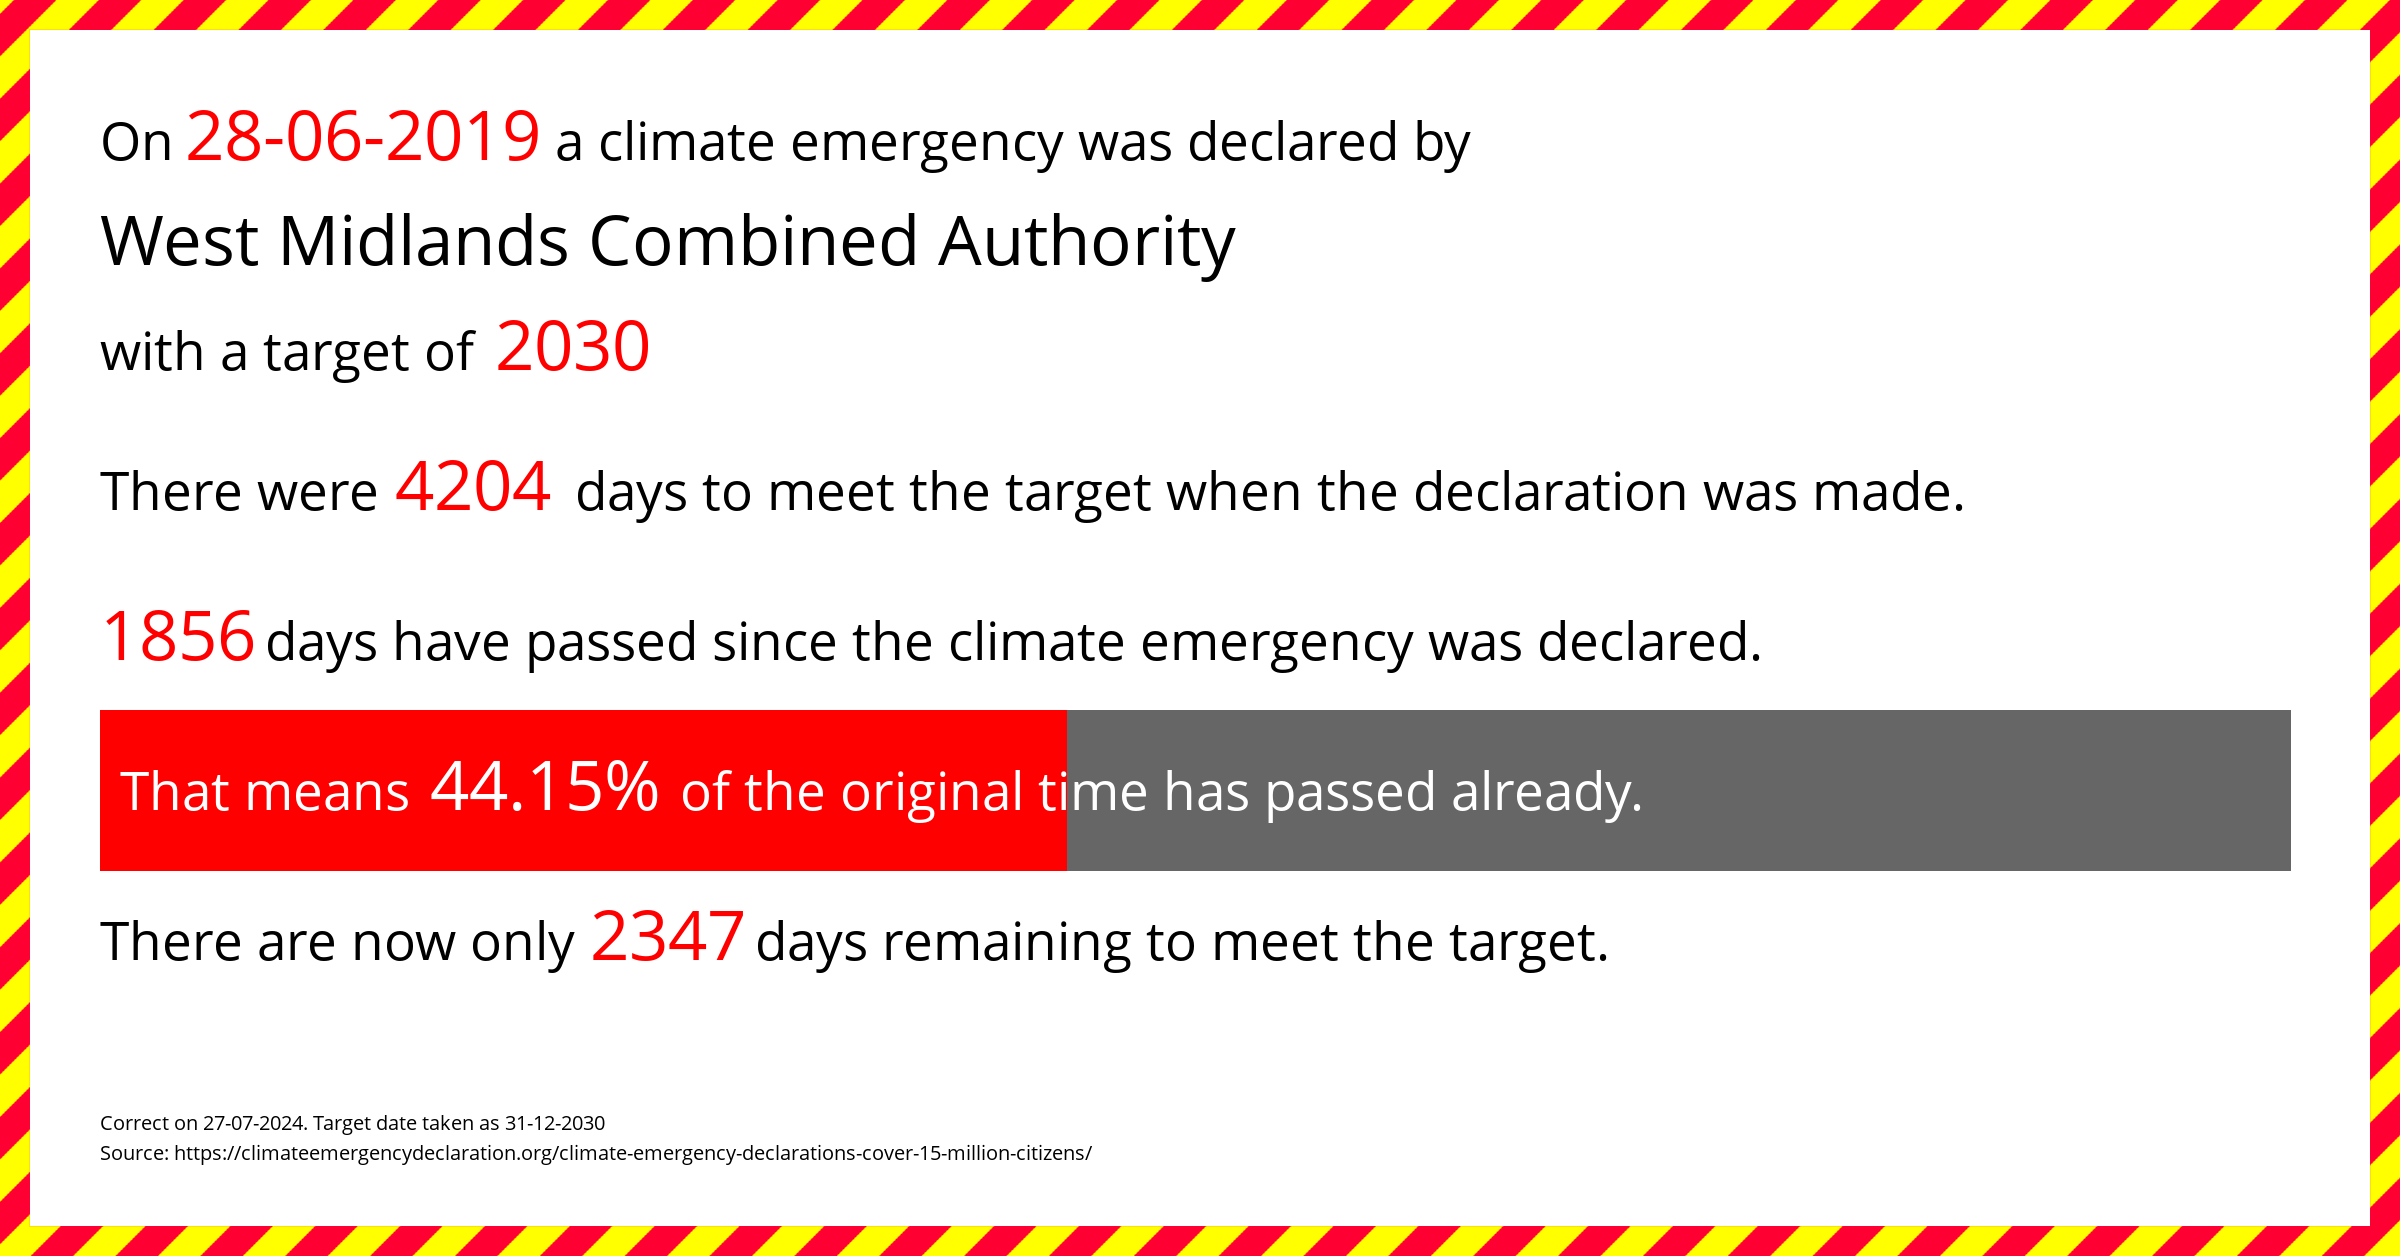 West Midlands Combined Authority declared a Climate emergency on Friday 28th June 2019, with a target of 2030.